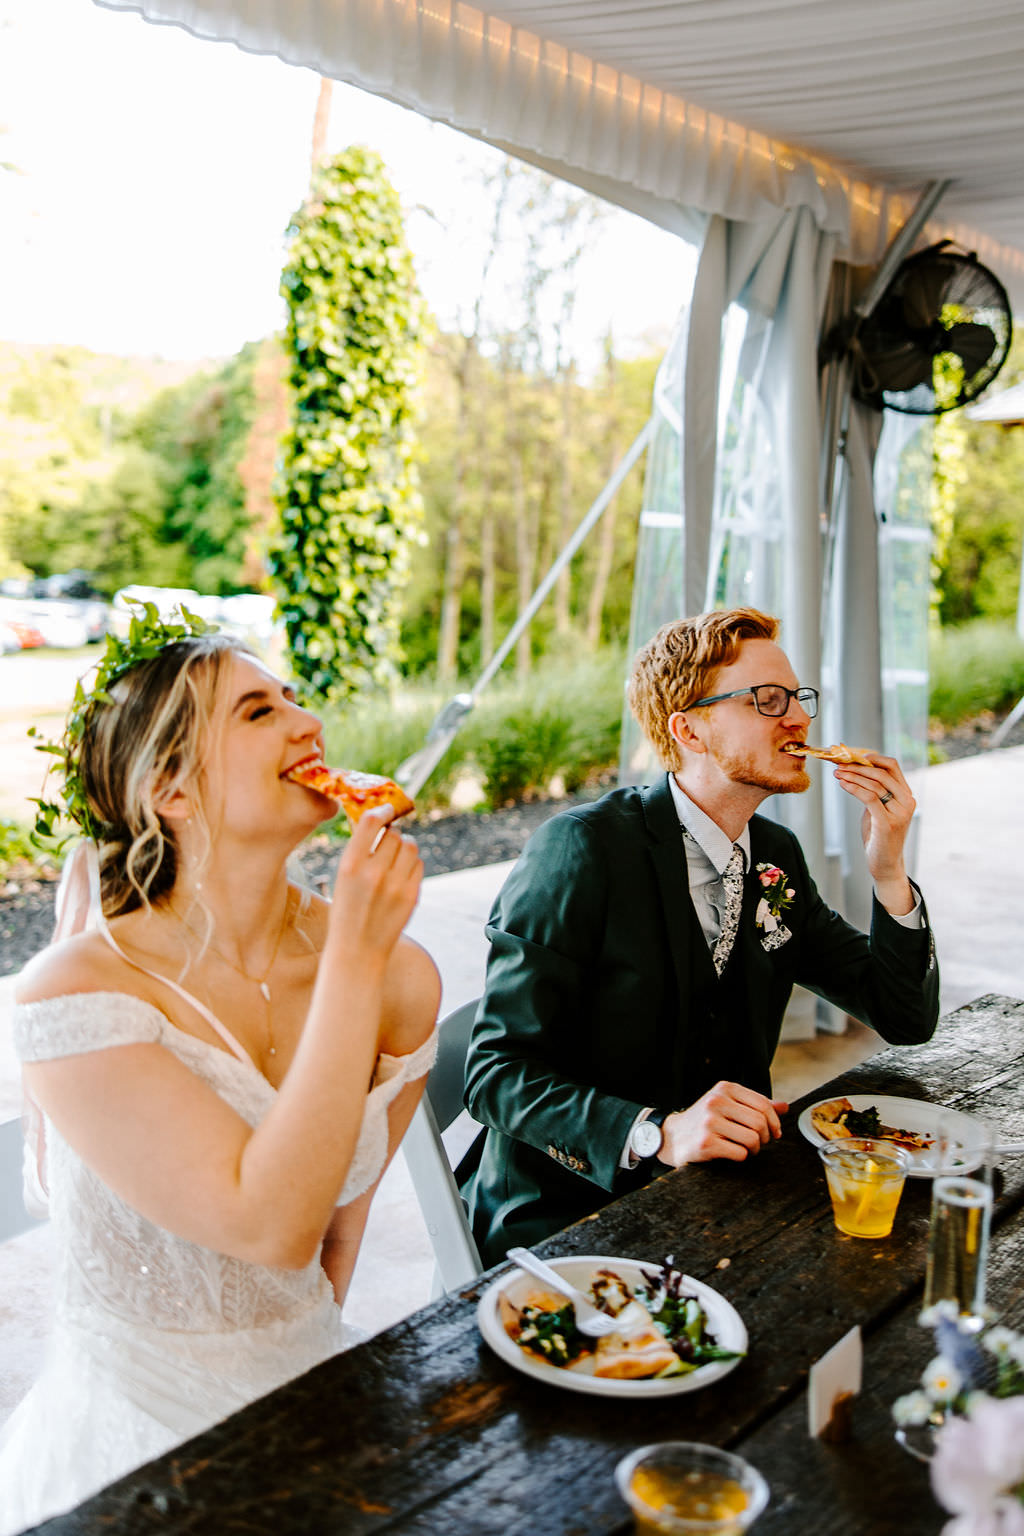 Bride and groom enjoying pizza at their wedding reception